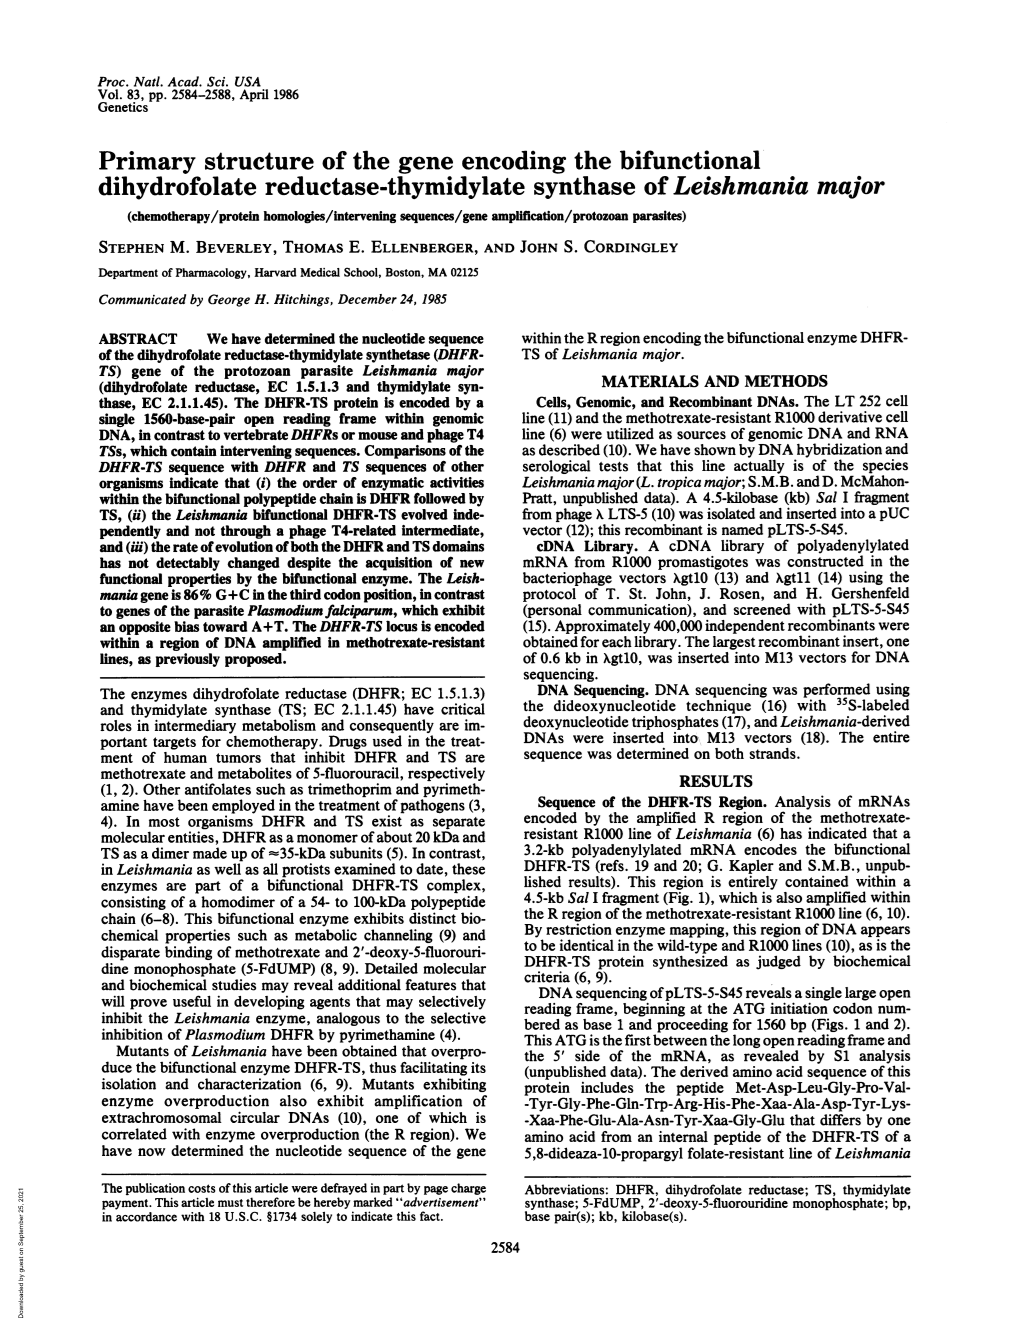 Dihydrofolate Reductase-Thymidylate Synthase of Leishmania Major